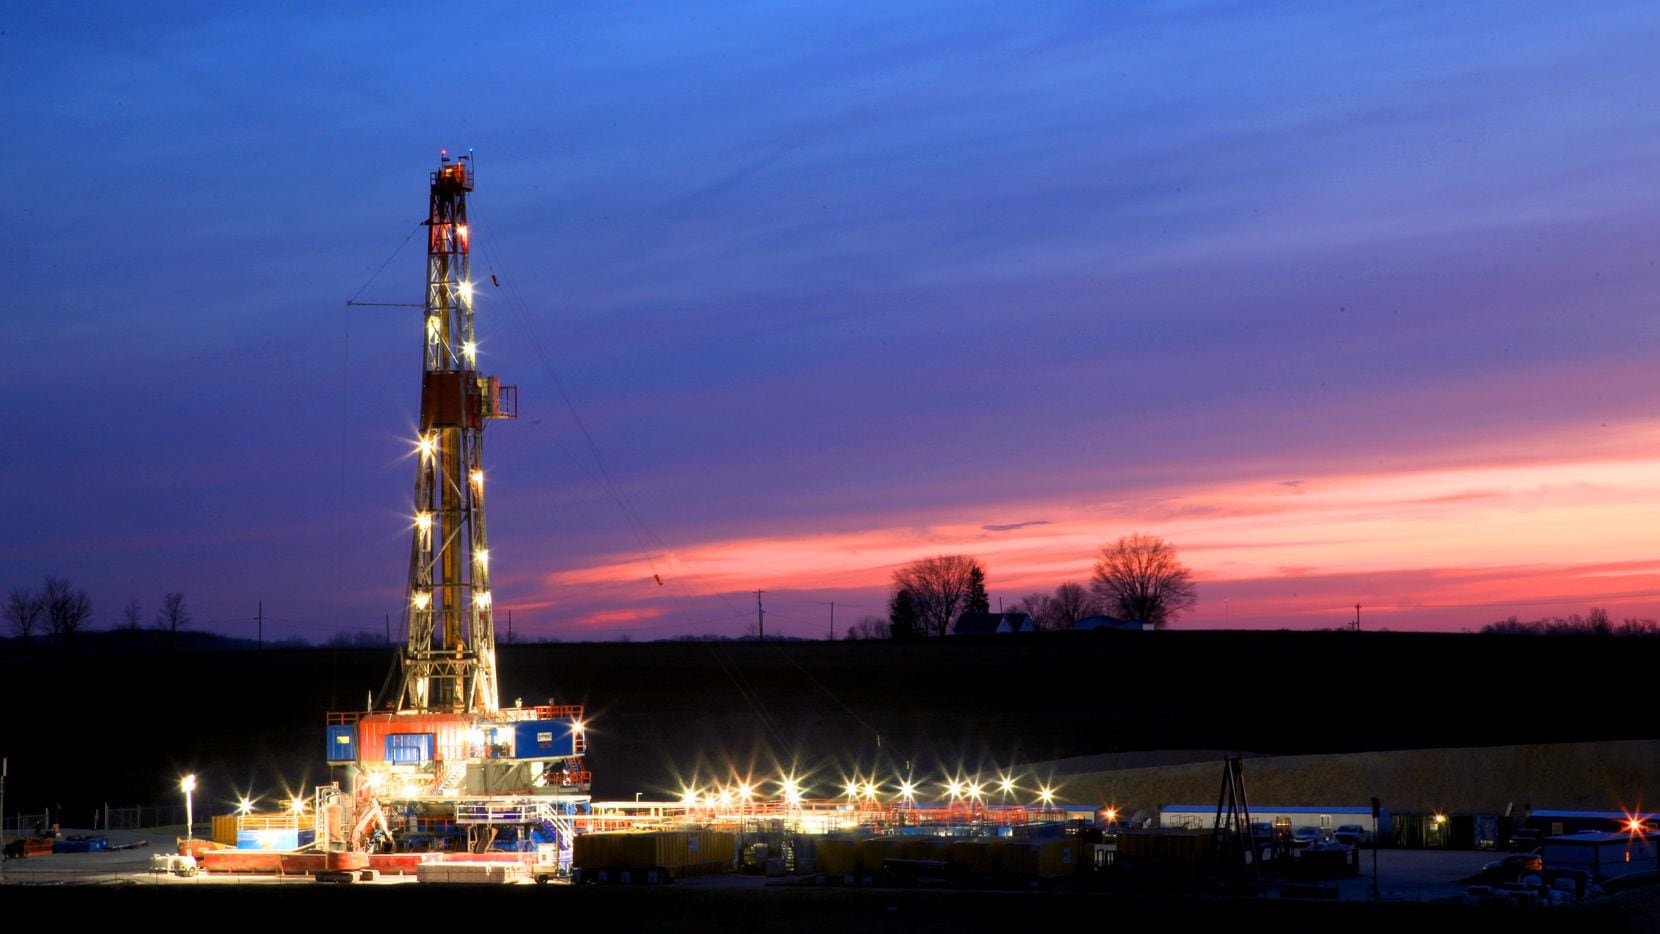 The merger is part of a broader trend of oil and gas companies consolidating to adapt and...